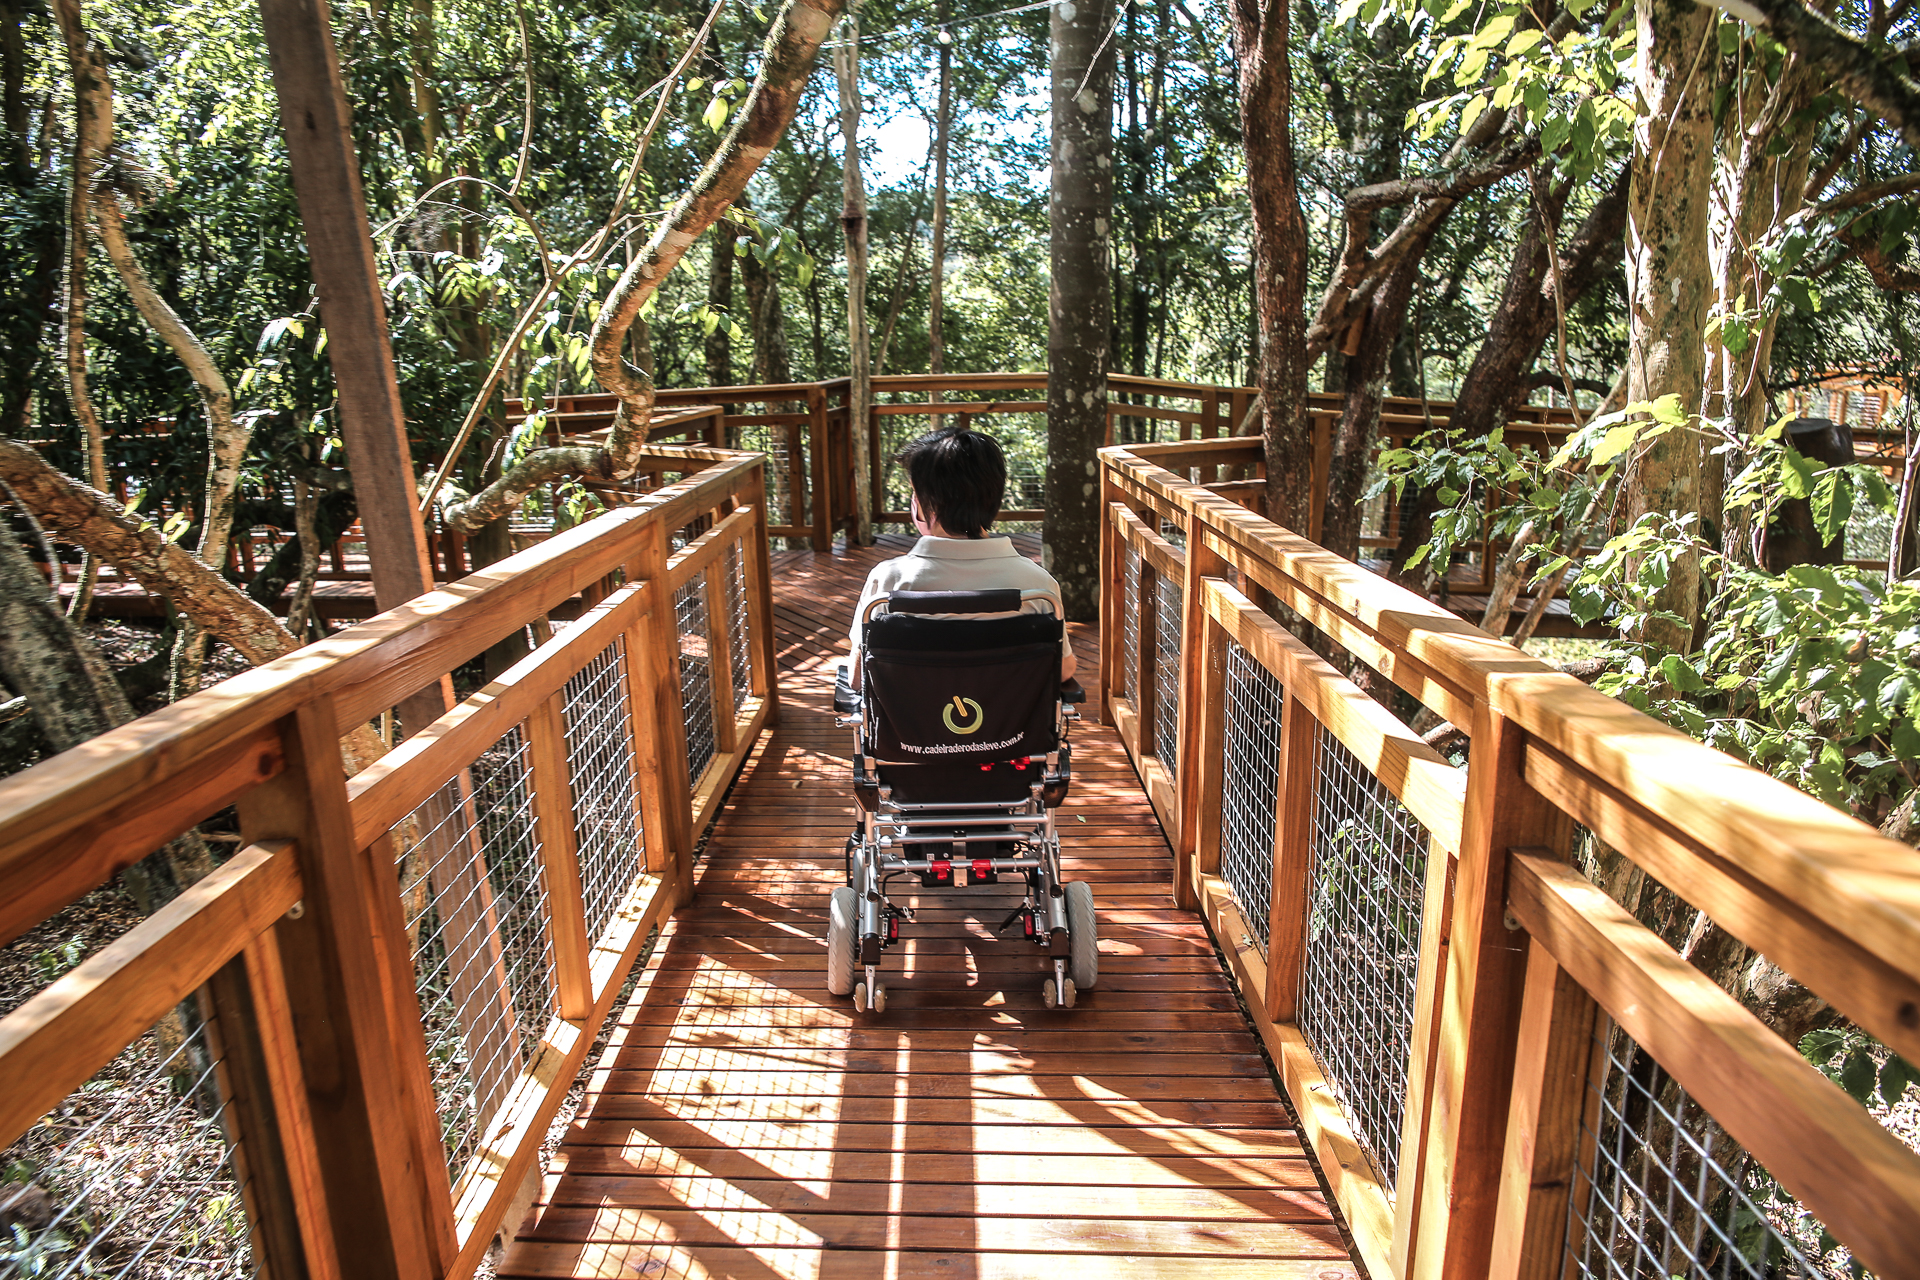 Image shows a person in a wheelchair in a treehouse on Airbnb